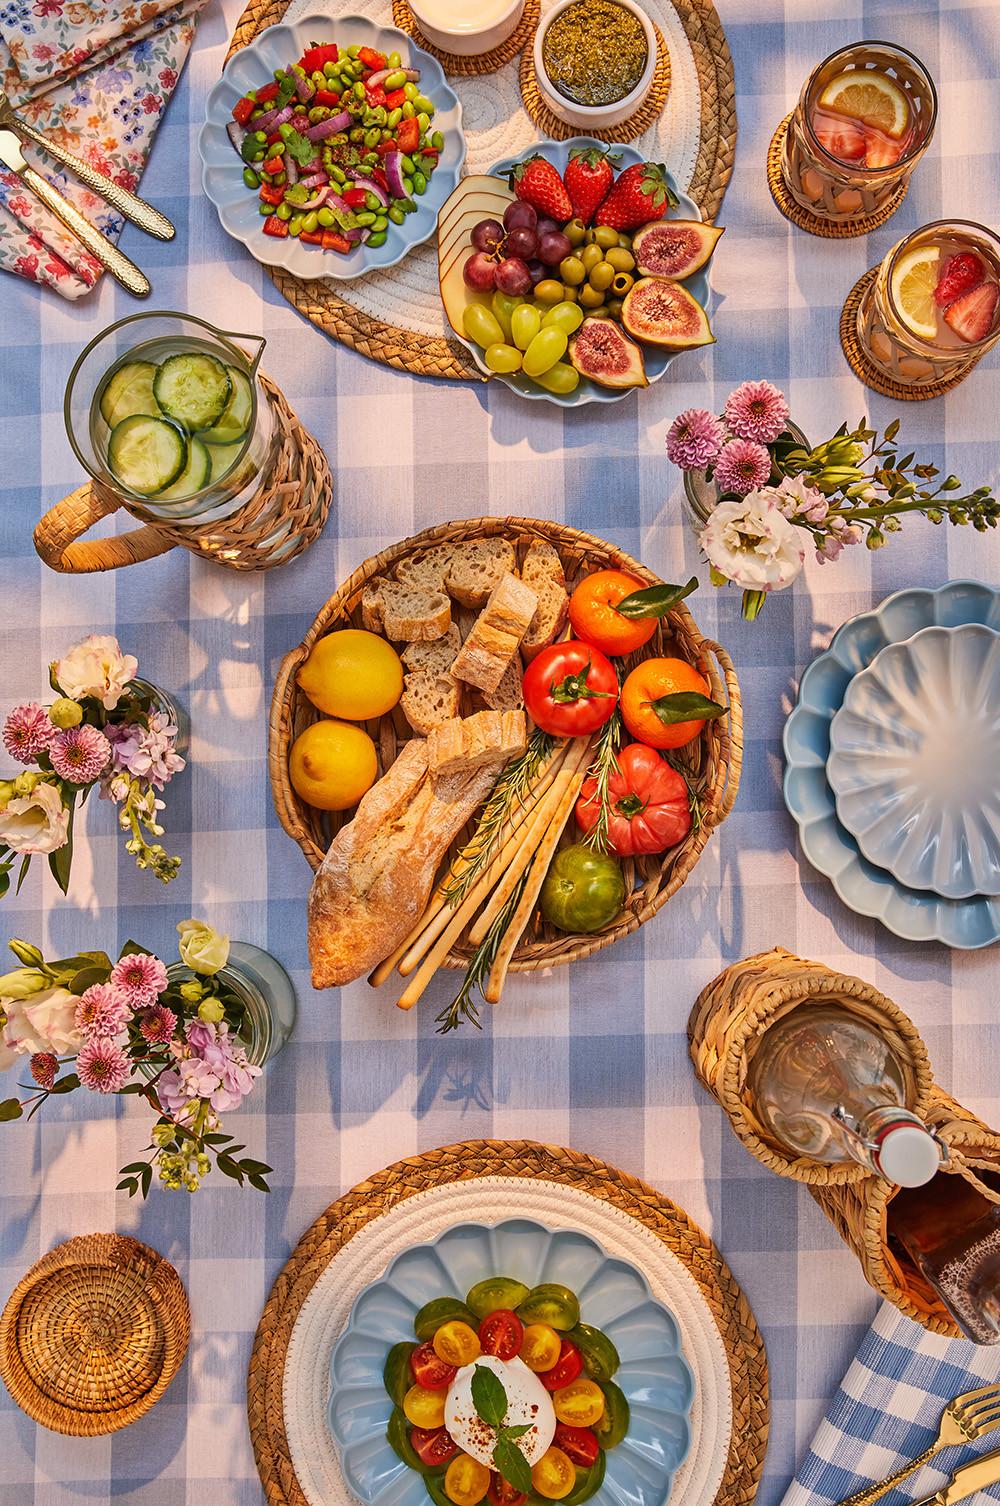 Table set up with blue gingham table cloth, various plates and baskets displaying food